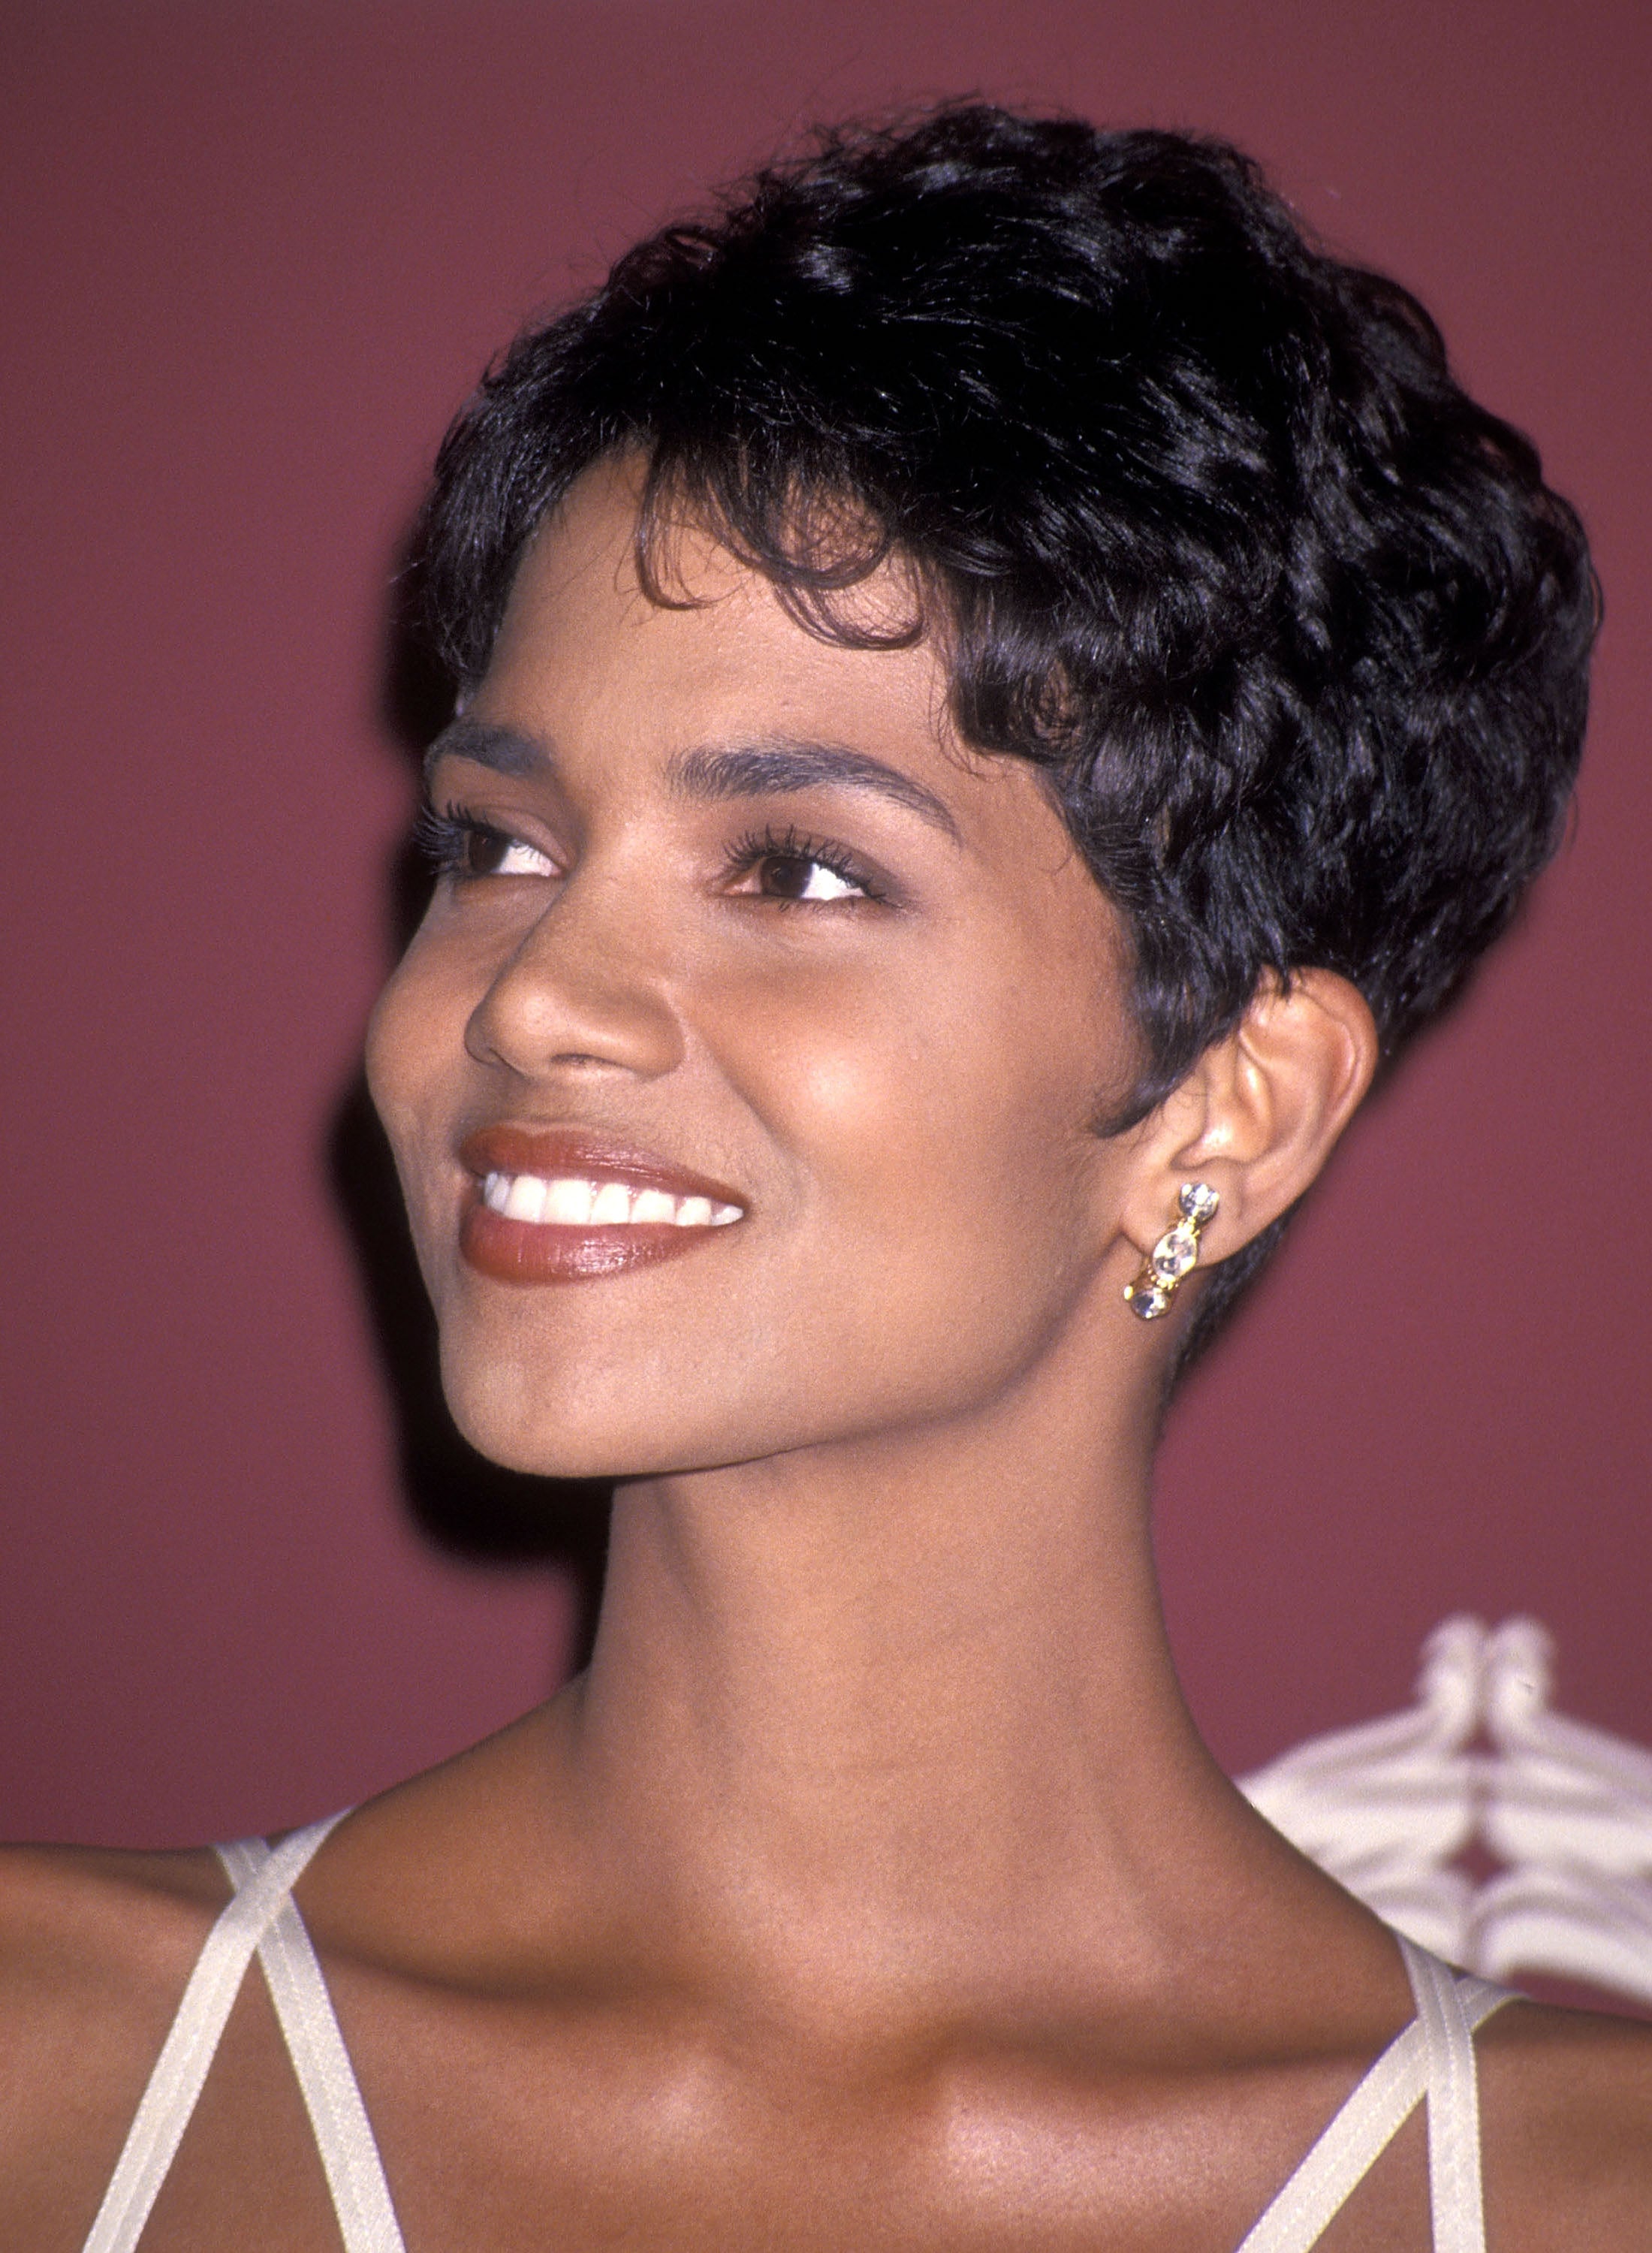 25 Halle Berry Approved Ways To Style Your Pixie Cut
